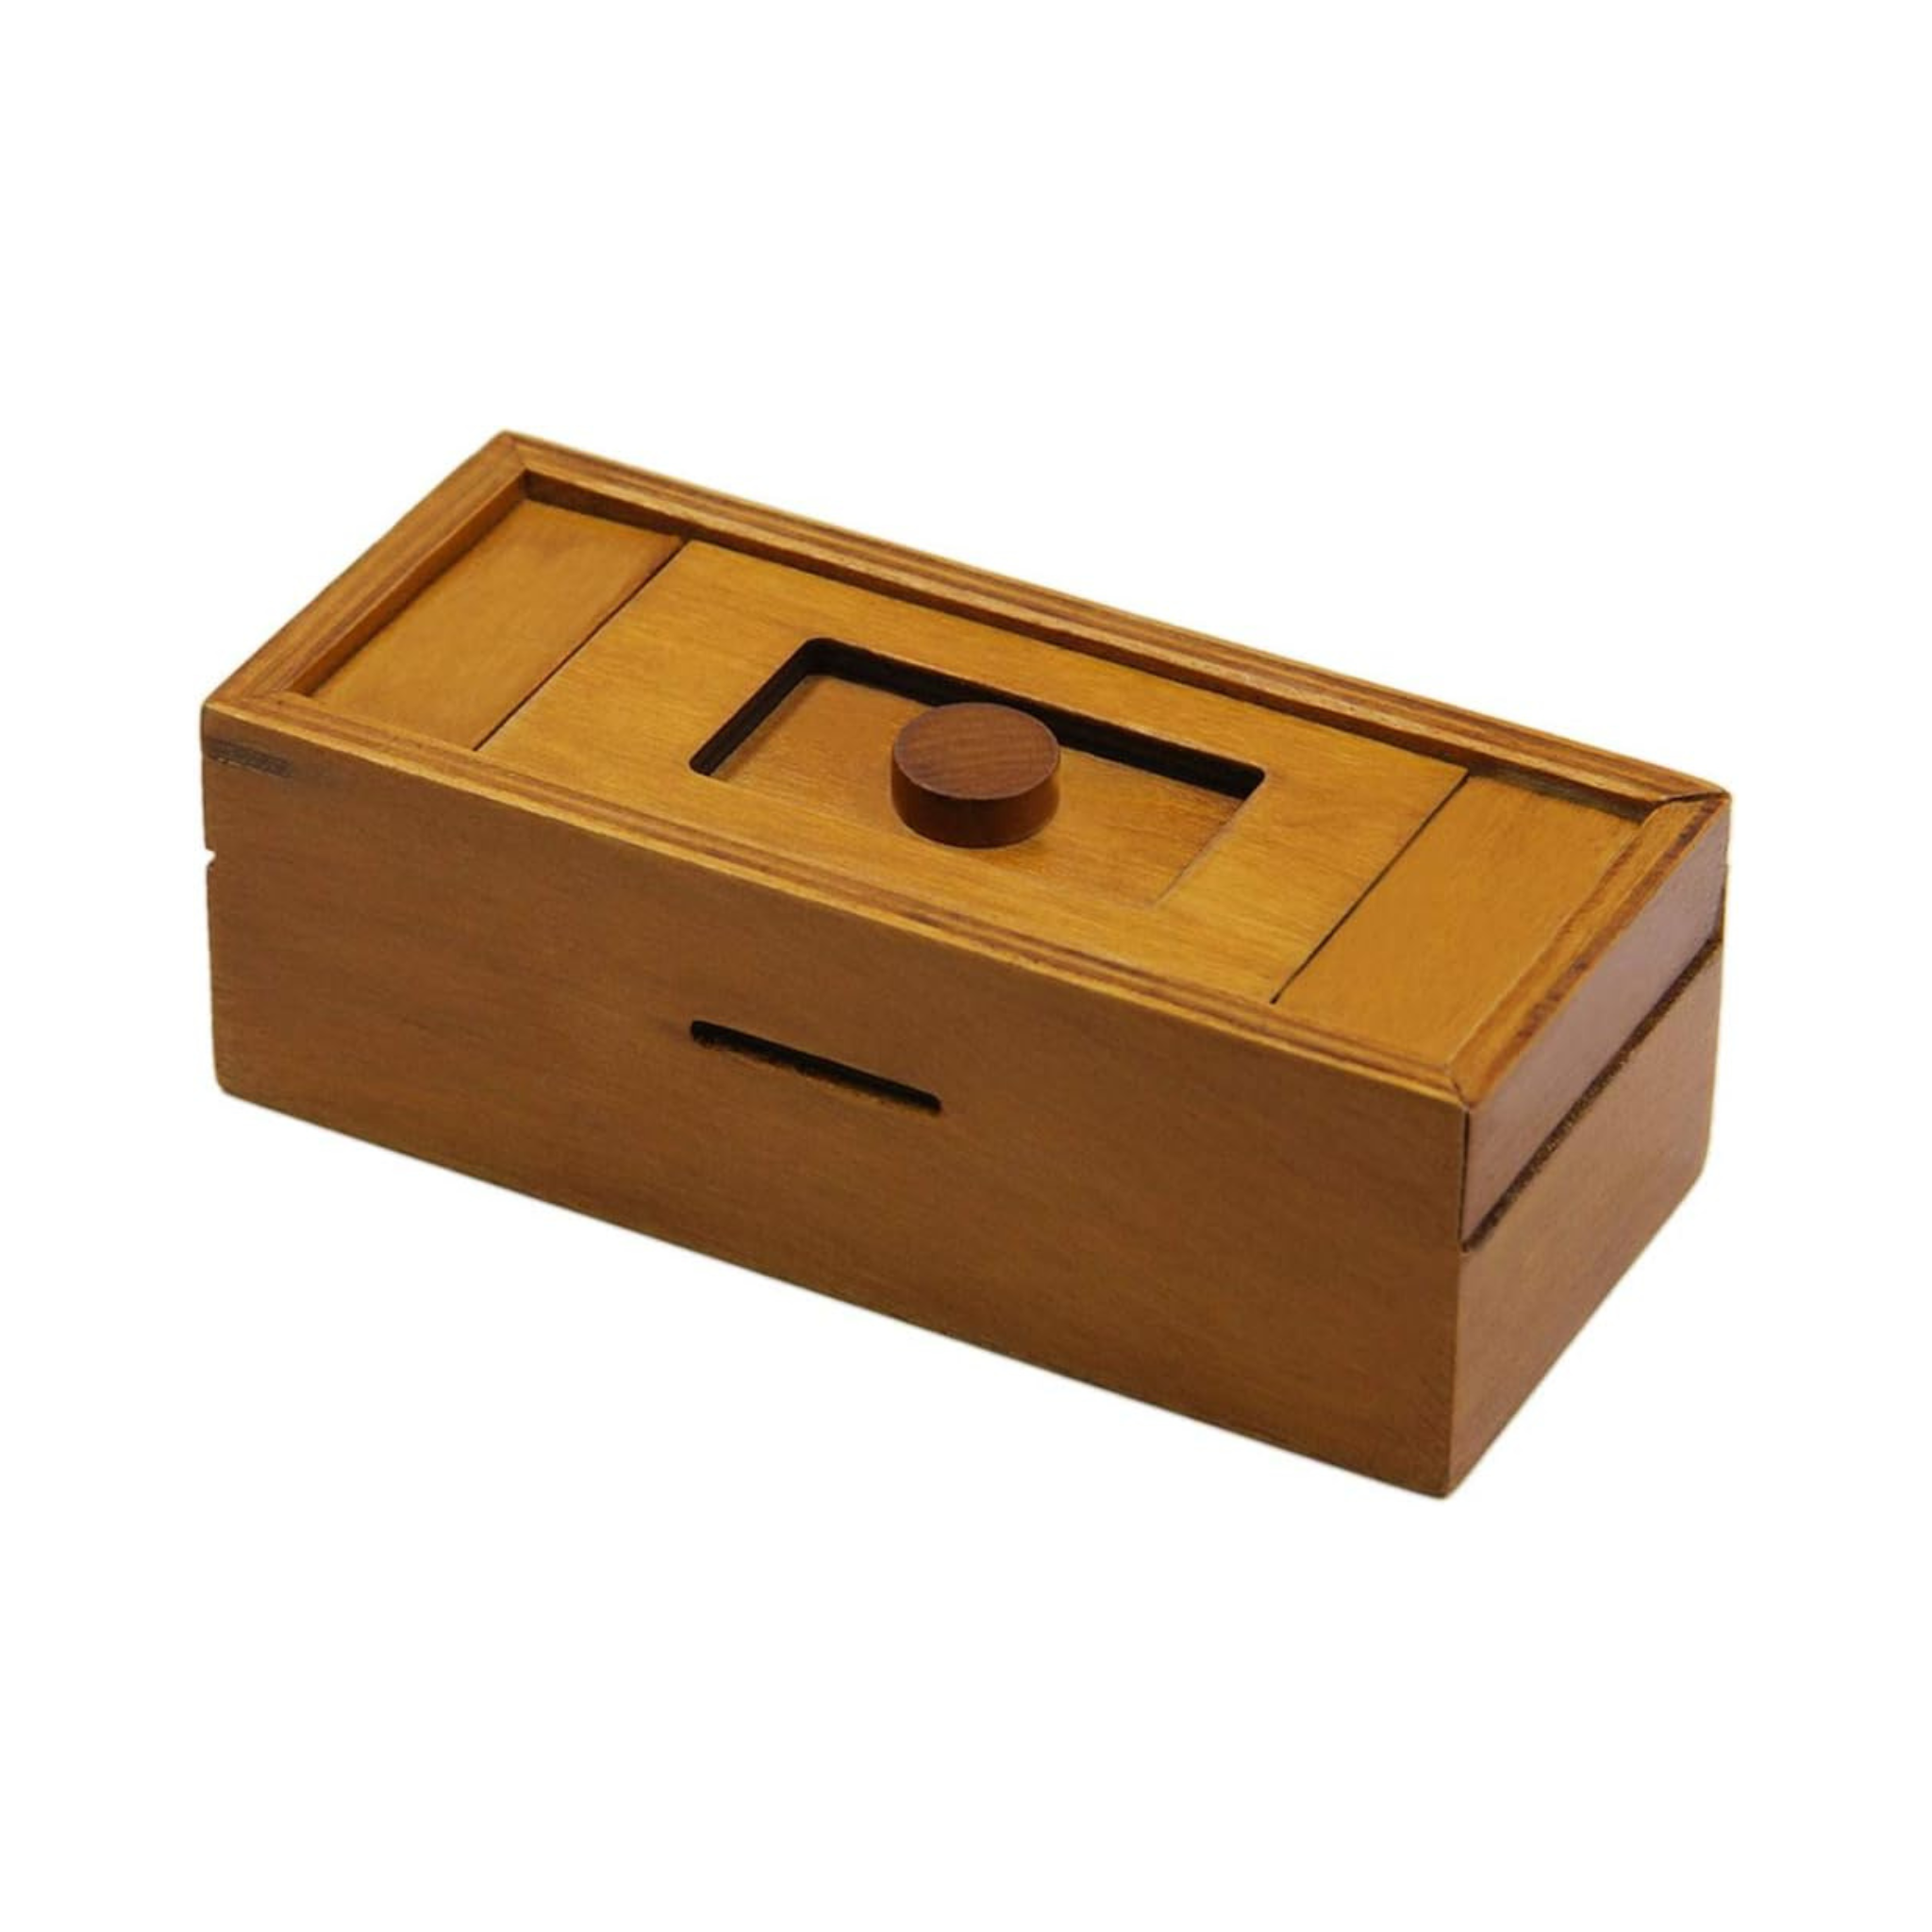 Atdawn Puzzle Gift Case Box with Secret Compartments, Wooden Money Box